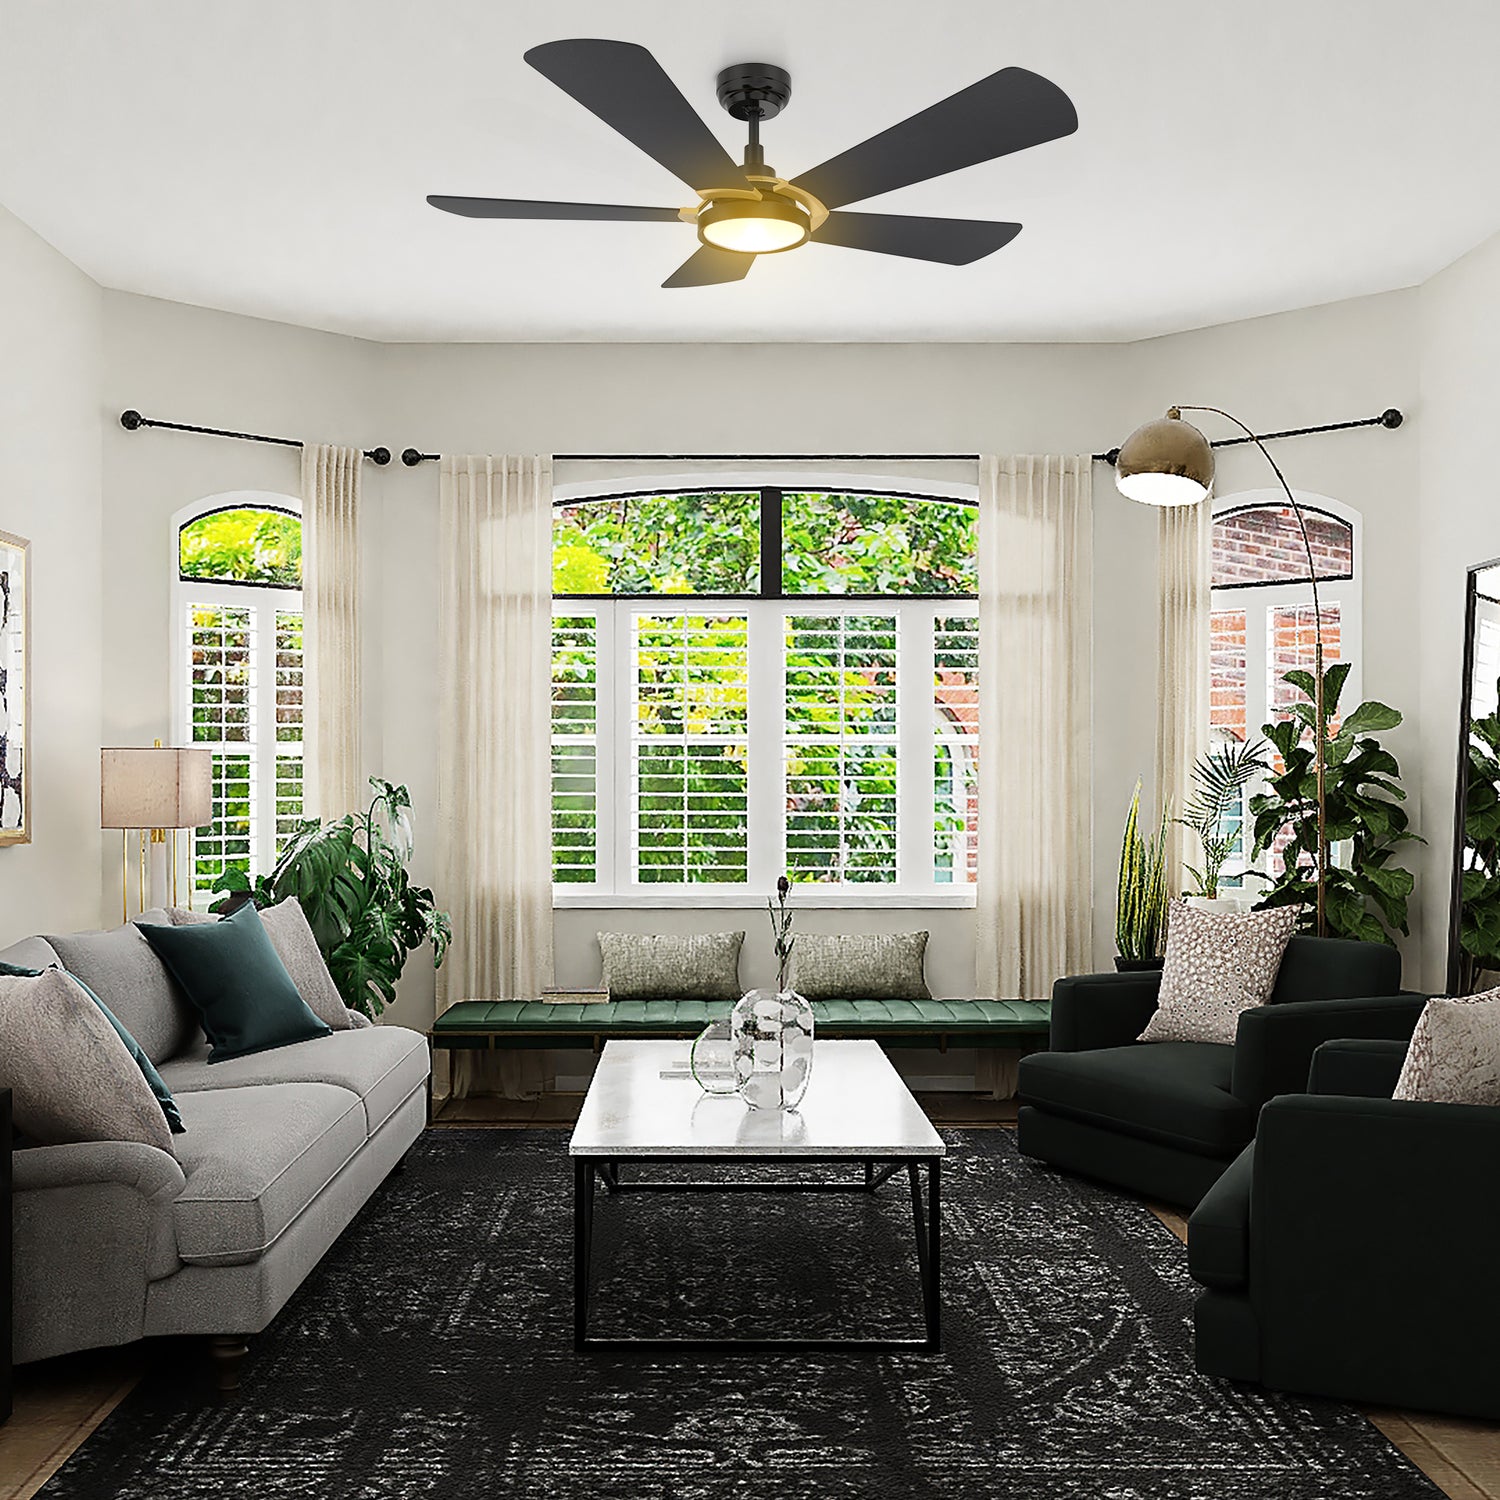 5 - Black Blade Clear Crystal Ceiling Fan with Remote Control for Living  Room